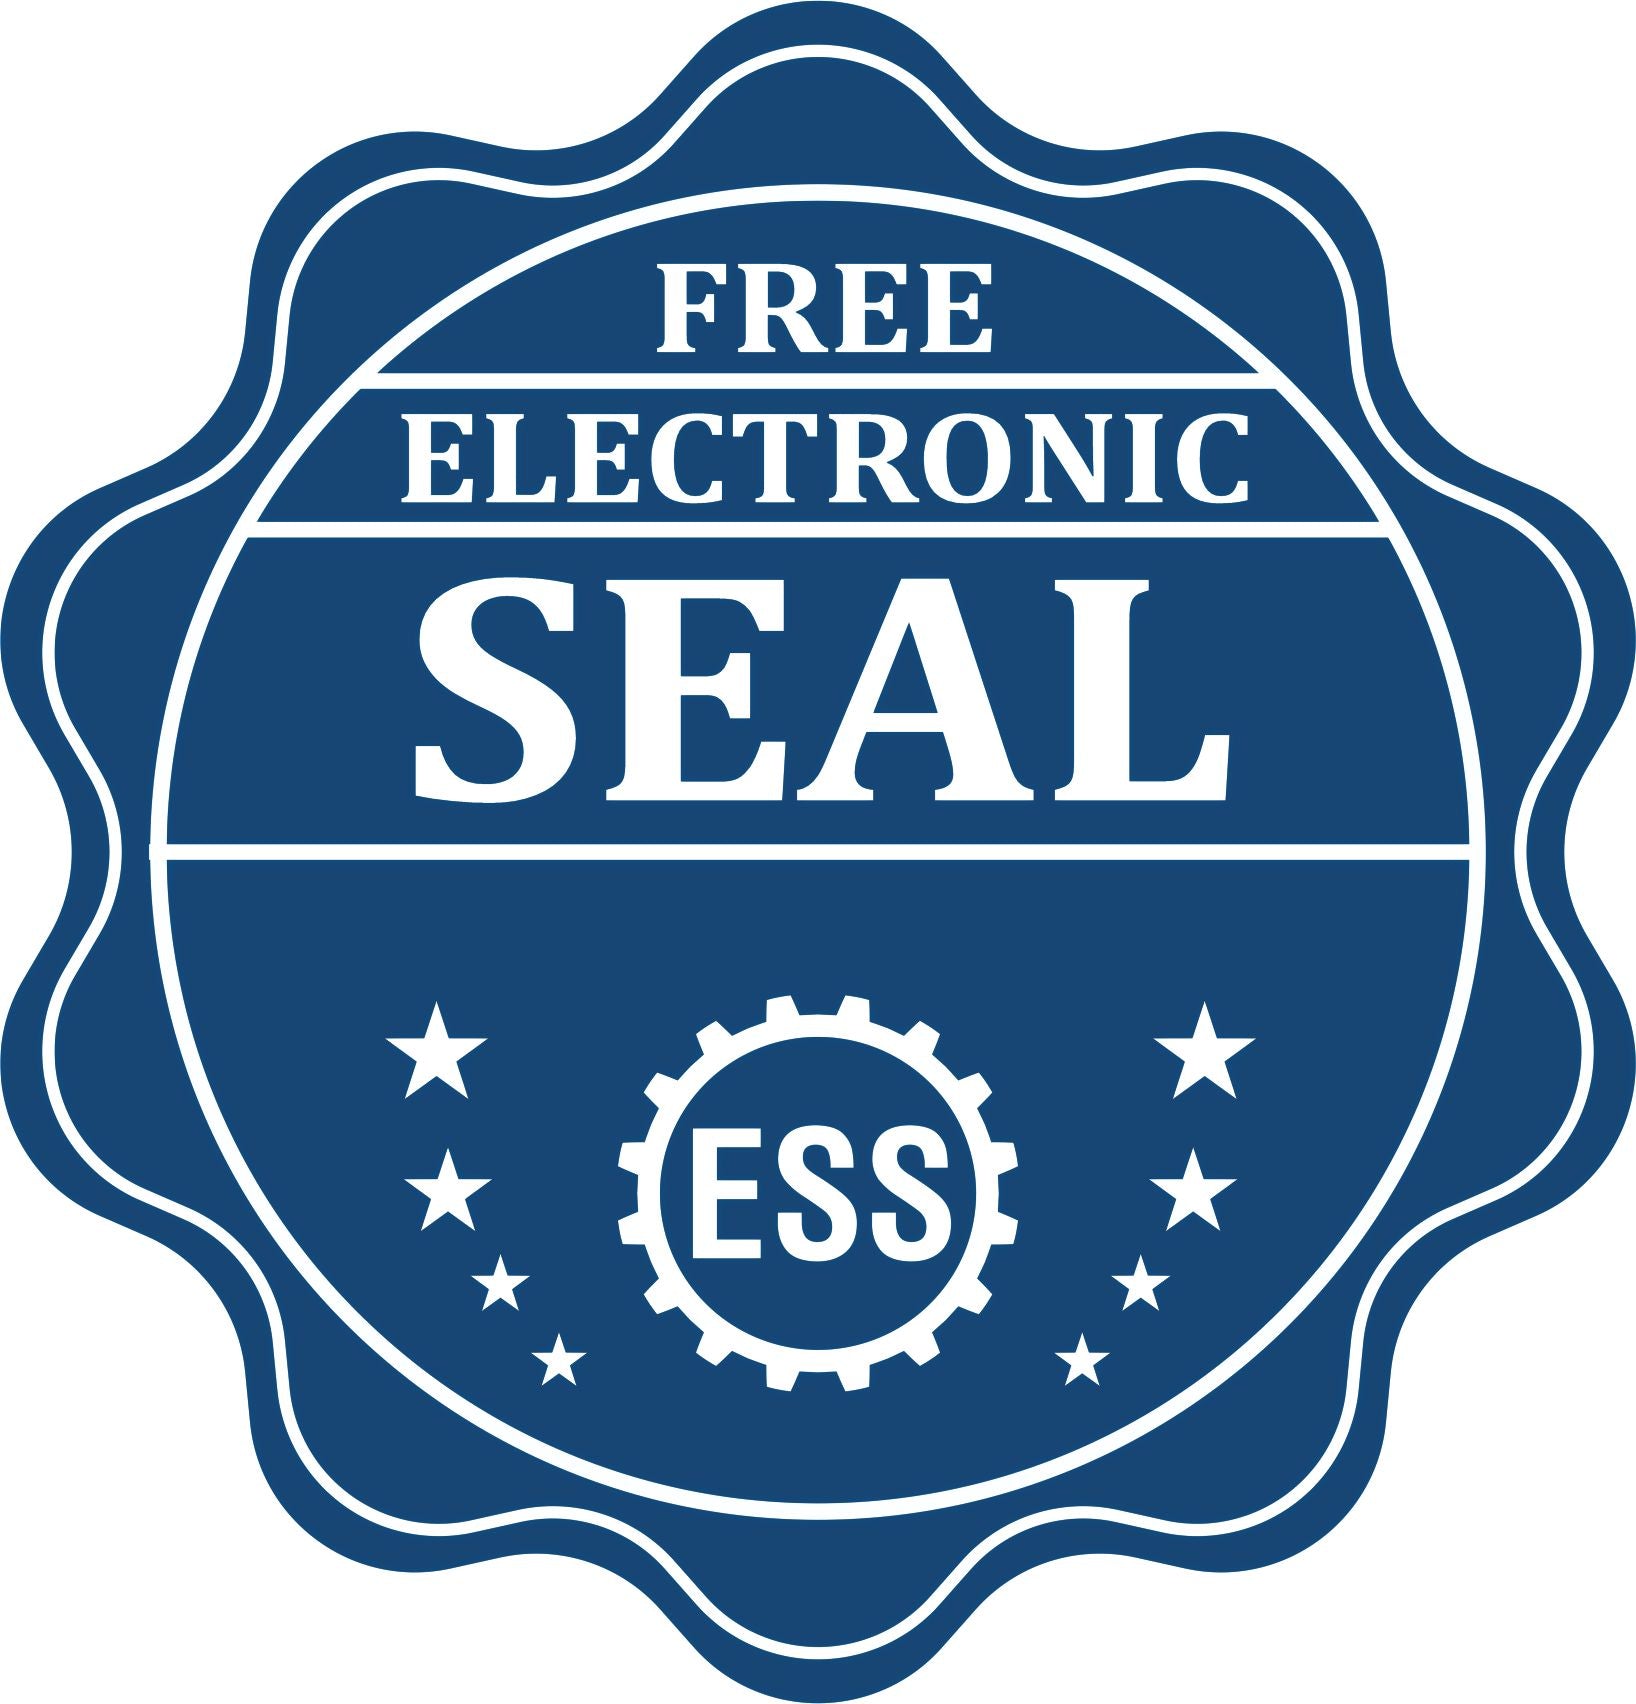 A badge showing a free electronic seal for the Heavy Duty Cast Iron Tennessee Engineer Seal Embosser with stars and the ESS gear on the emblem.